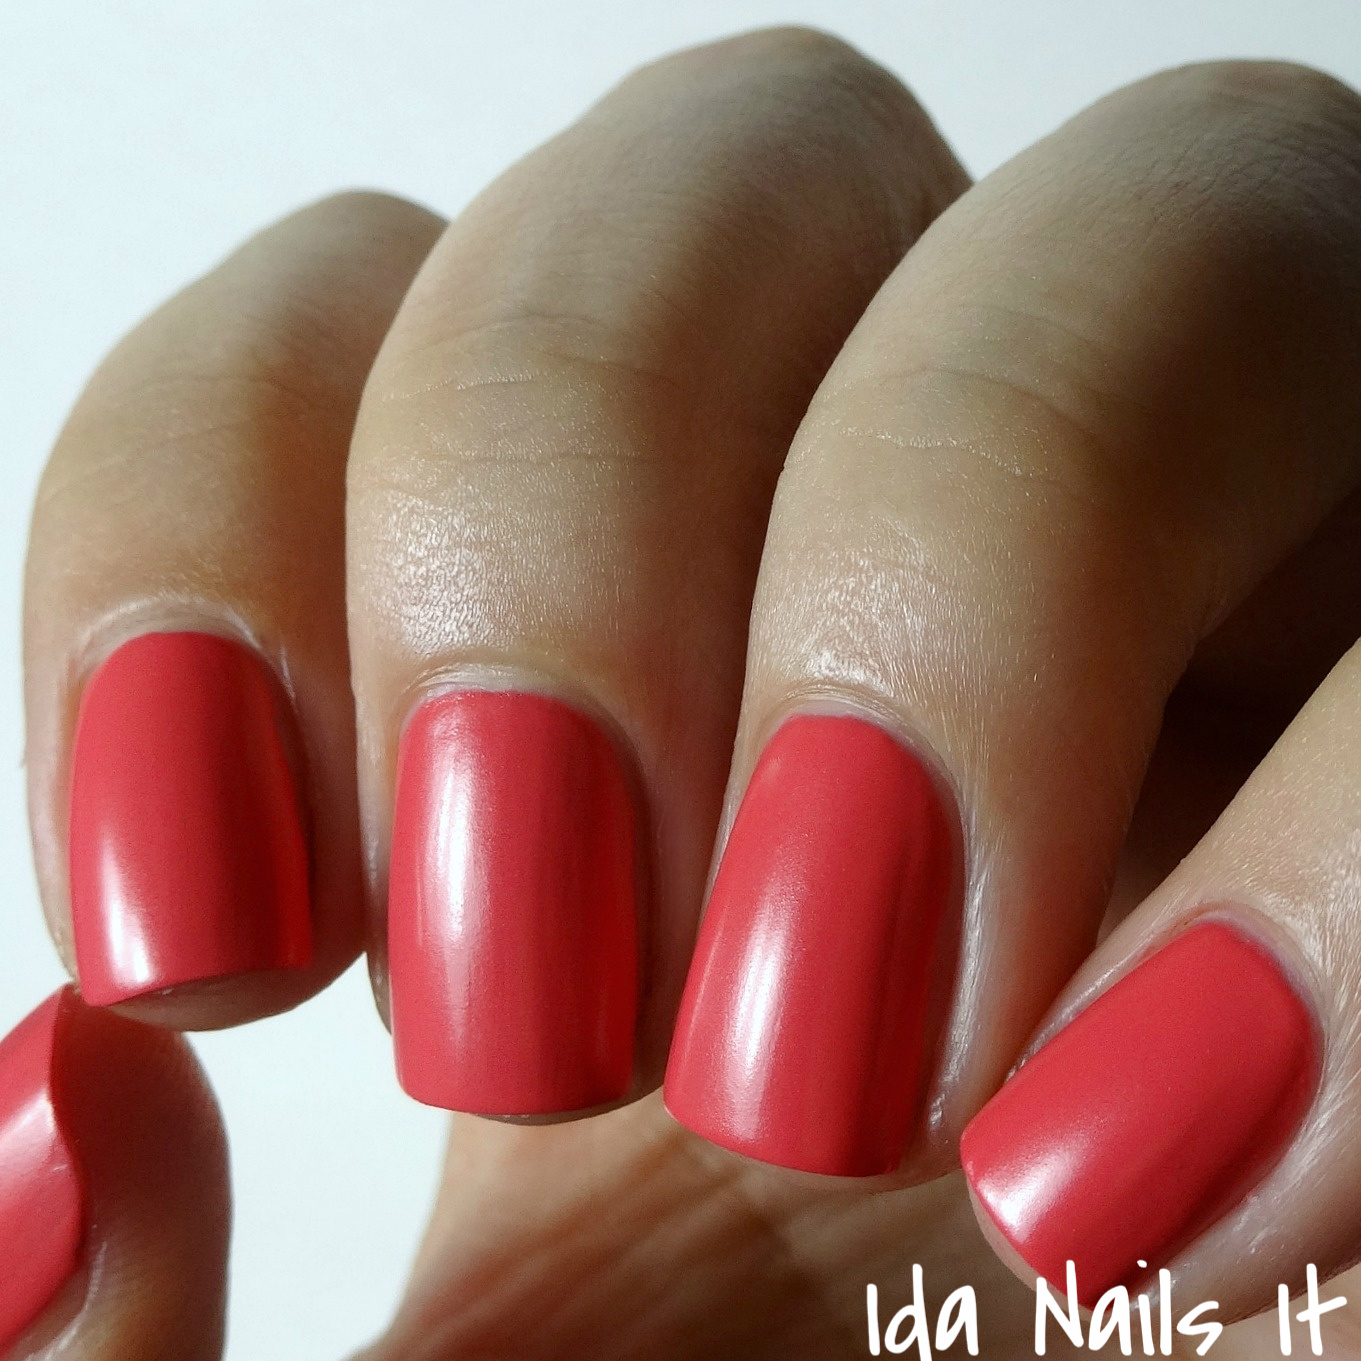 Ida Nails It Sinful Colors Kylie Jenner Trend Matters 